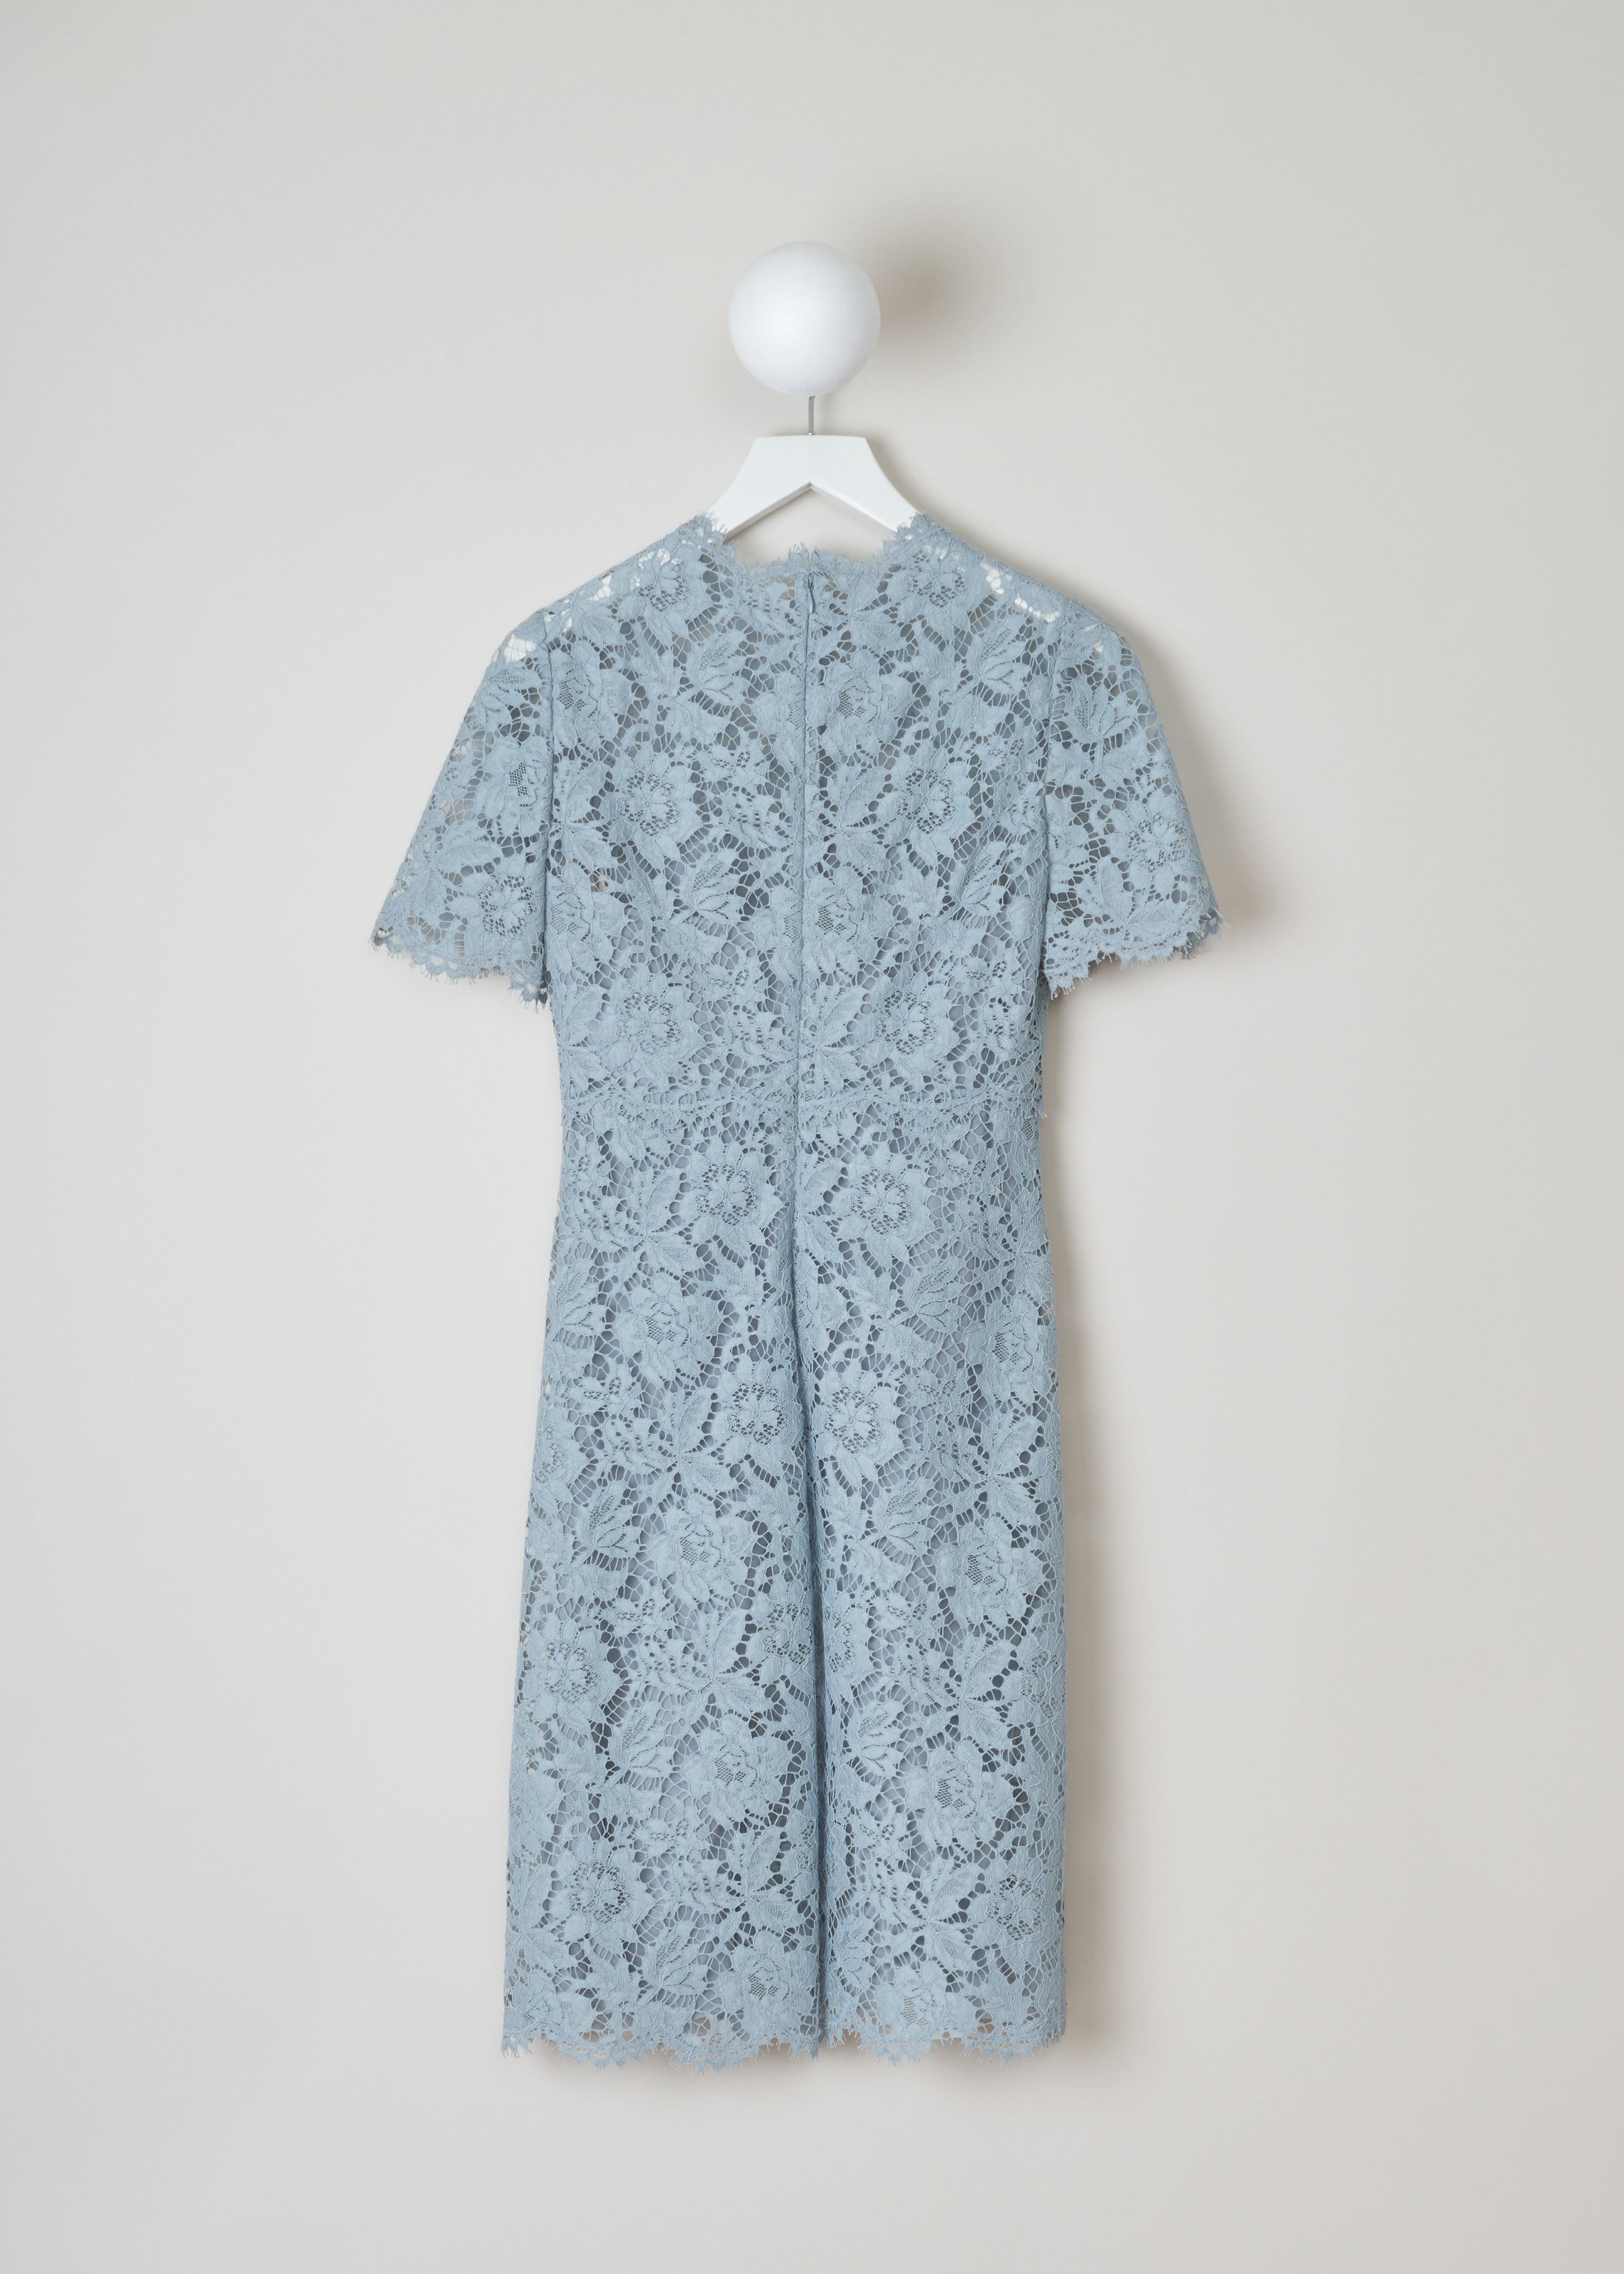 Valentino Light blue lace dress KB3VA6B61EC_A98 light blue back. Light blue midi dress in beautiful cotton lace with wide short sleeves, a bodice with a close-fit neckline, an a-line skirt, scalloped hems and an invisible zip fastening on the back.